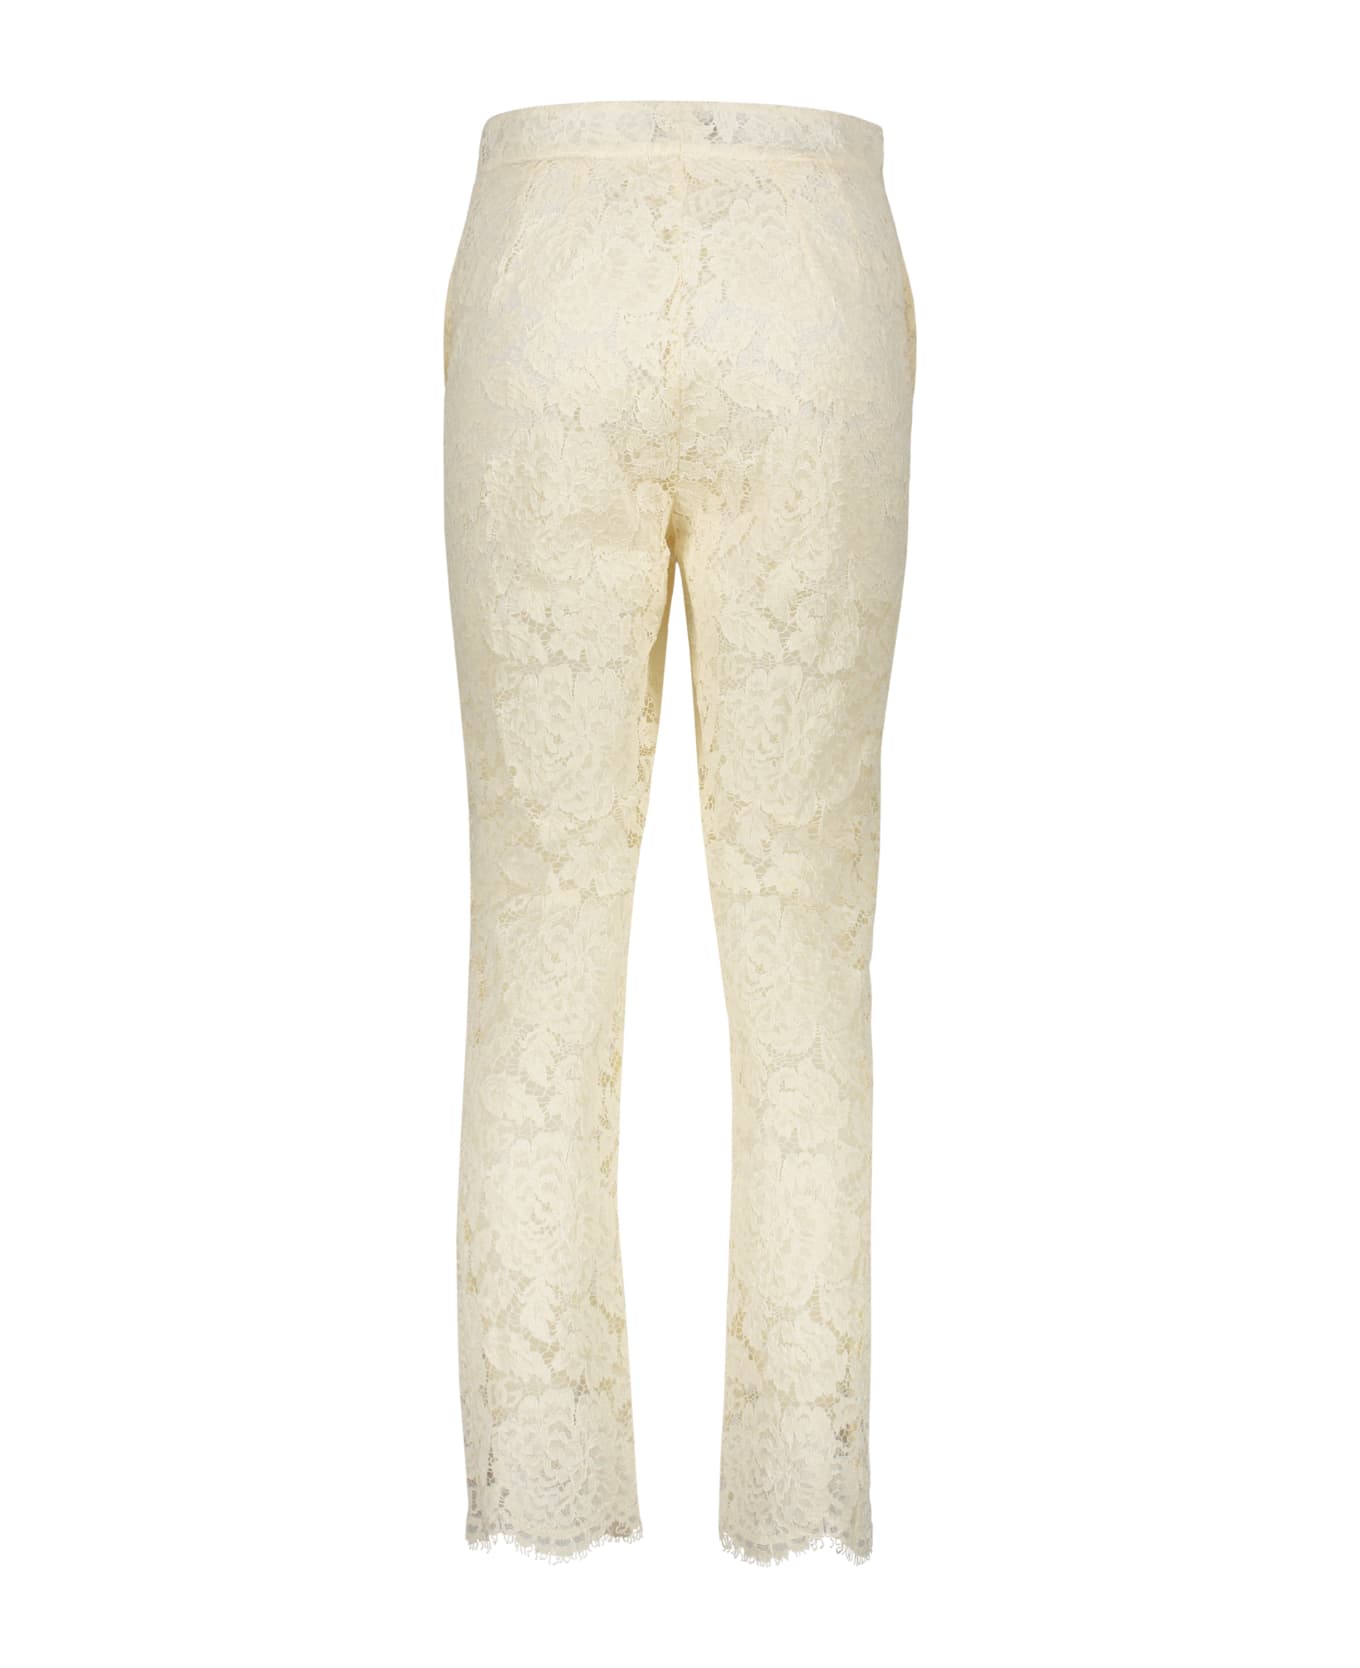 Dolce & Gabbana Lace Trousers - Ivory ボトムス